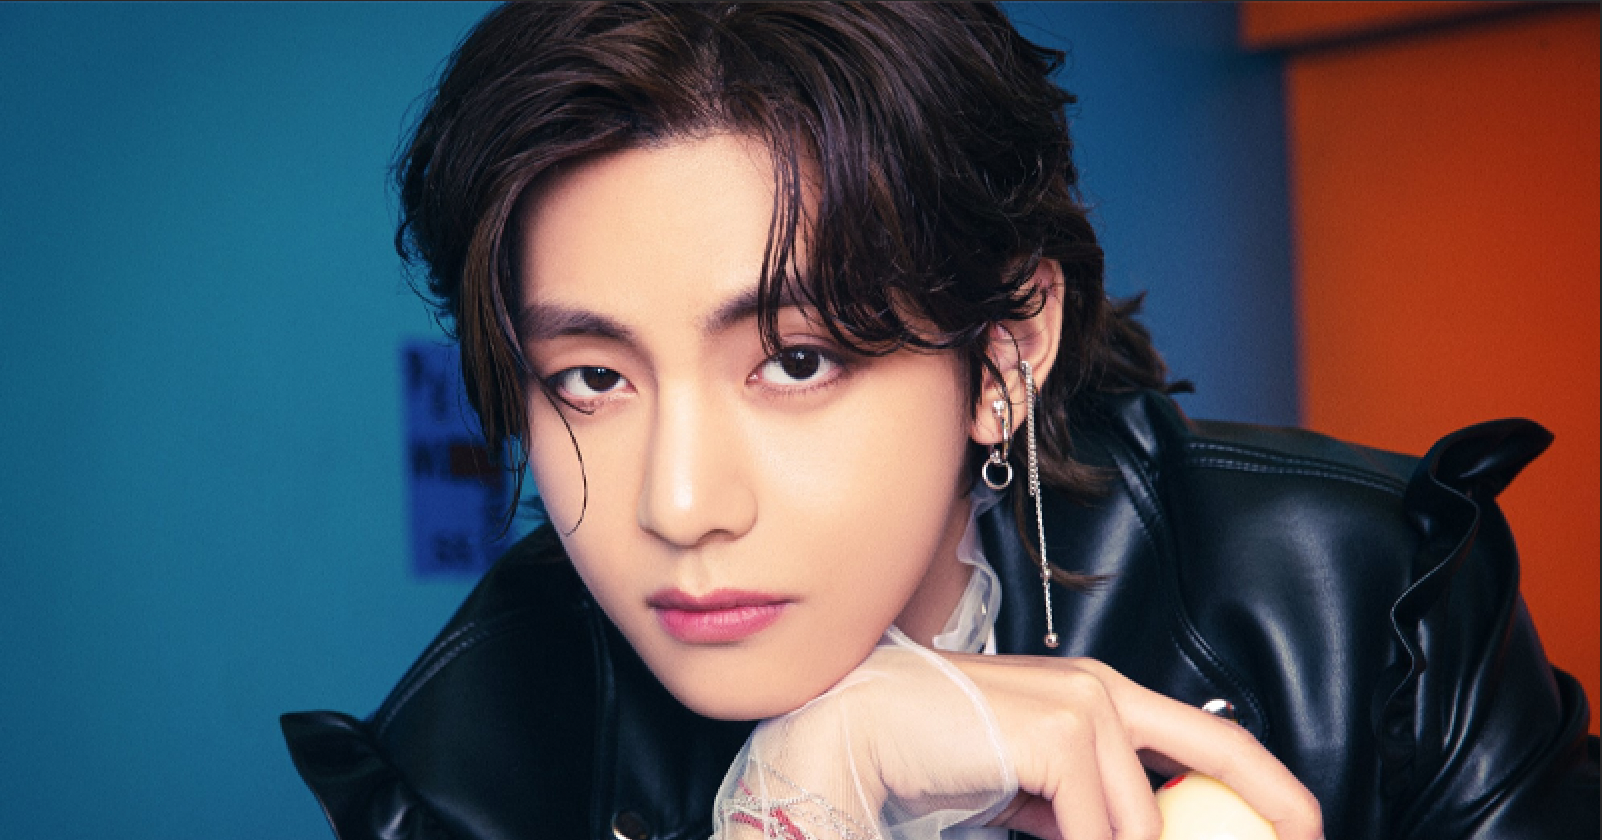 BTS V Revealed to be the Most-Mentioned K-pop Idol on Twitter in Japan in 1st Half of 2021